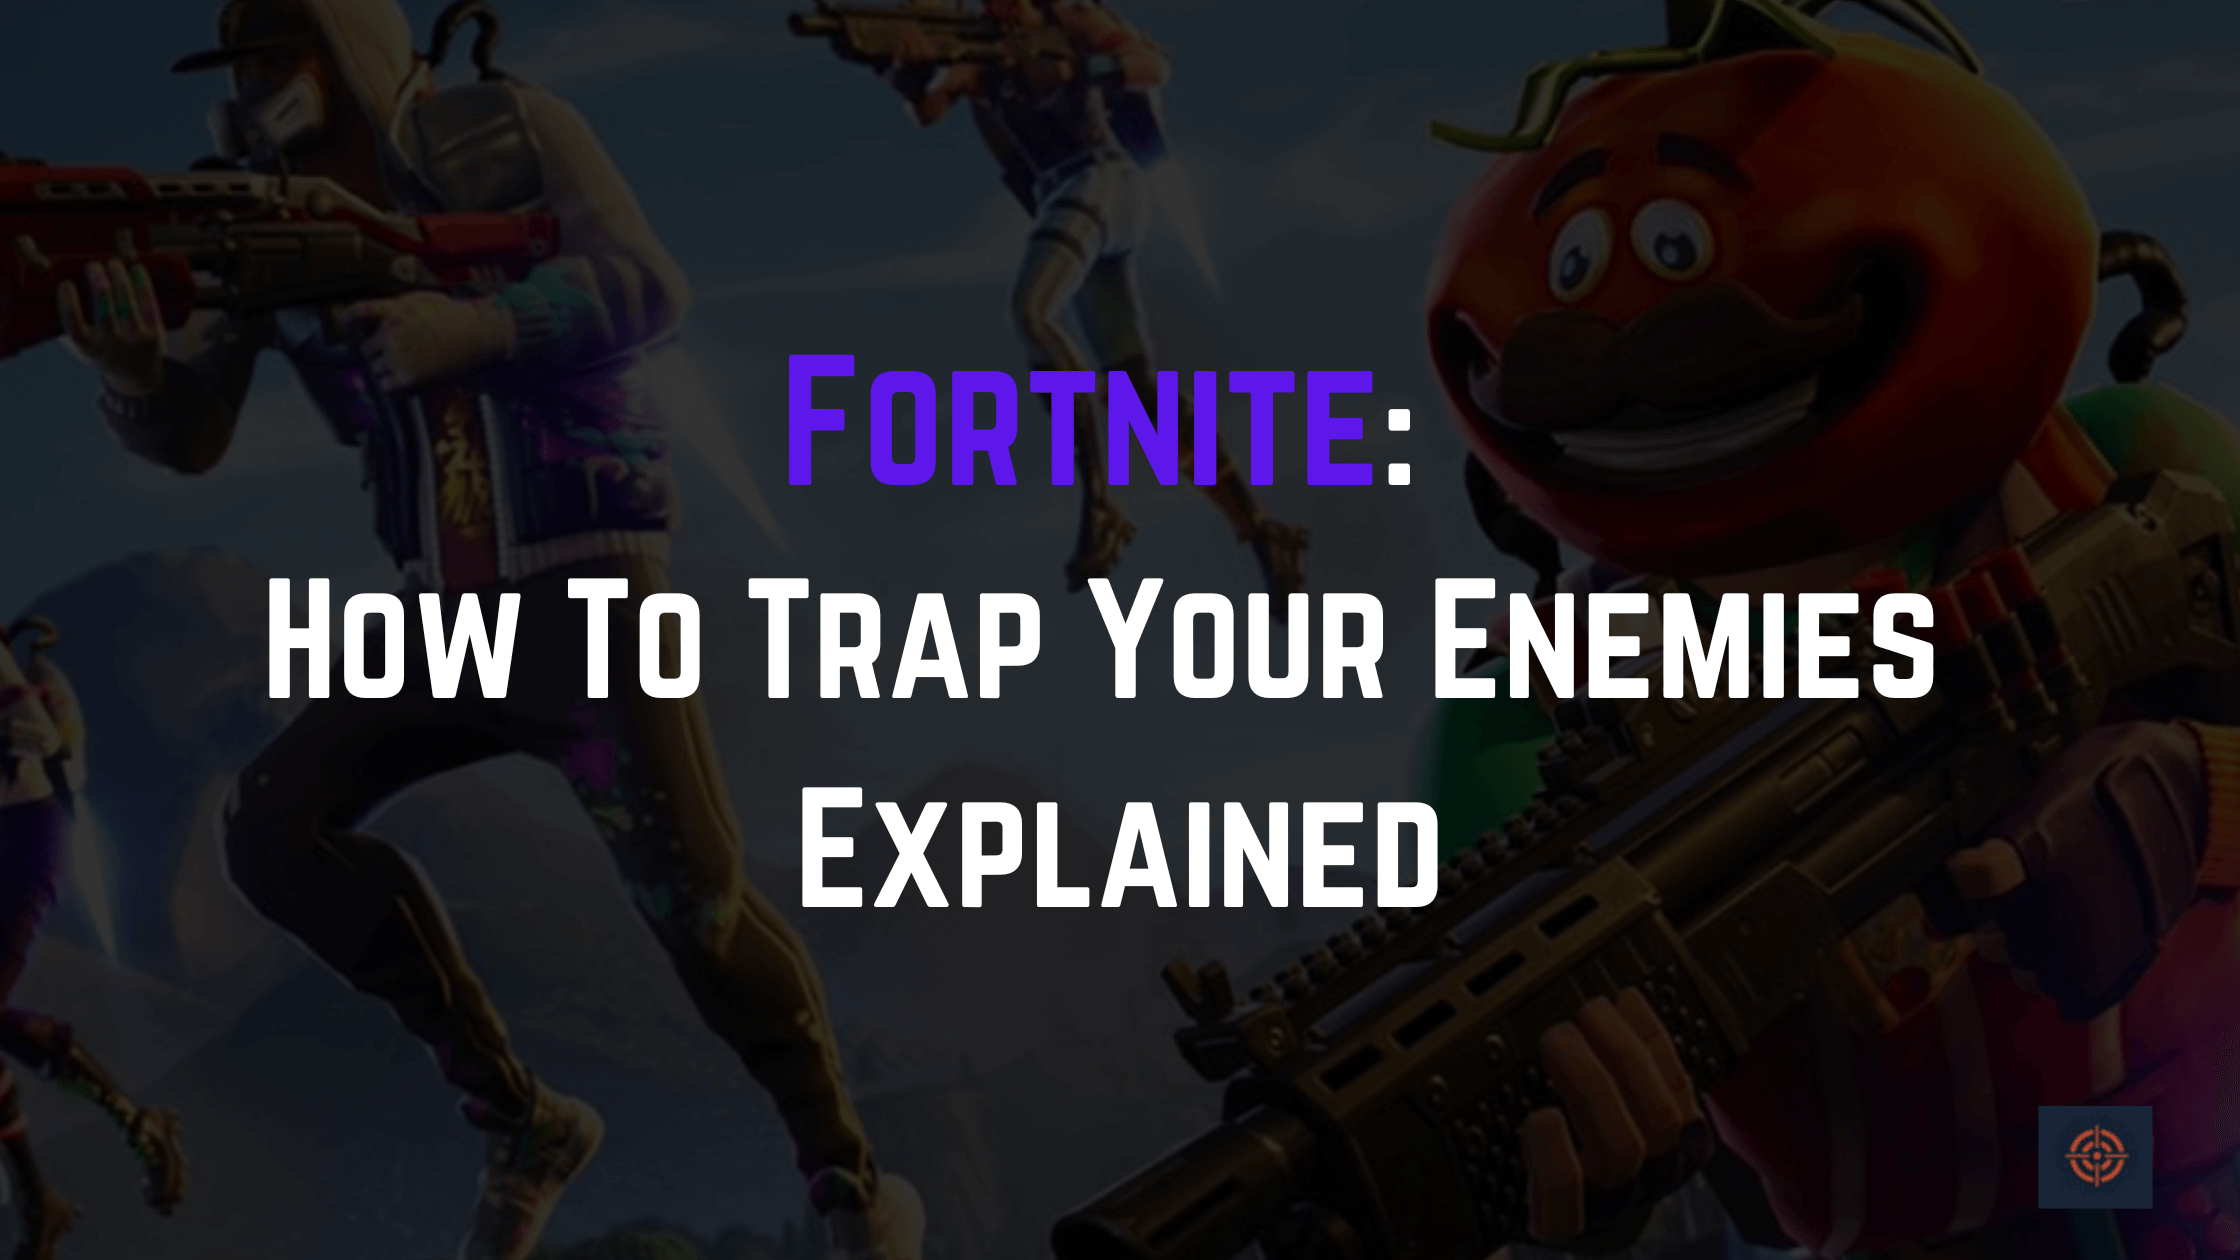 How To Trap Your Enemies in Fortnite